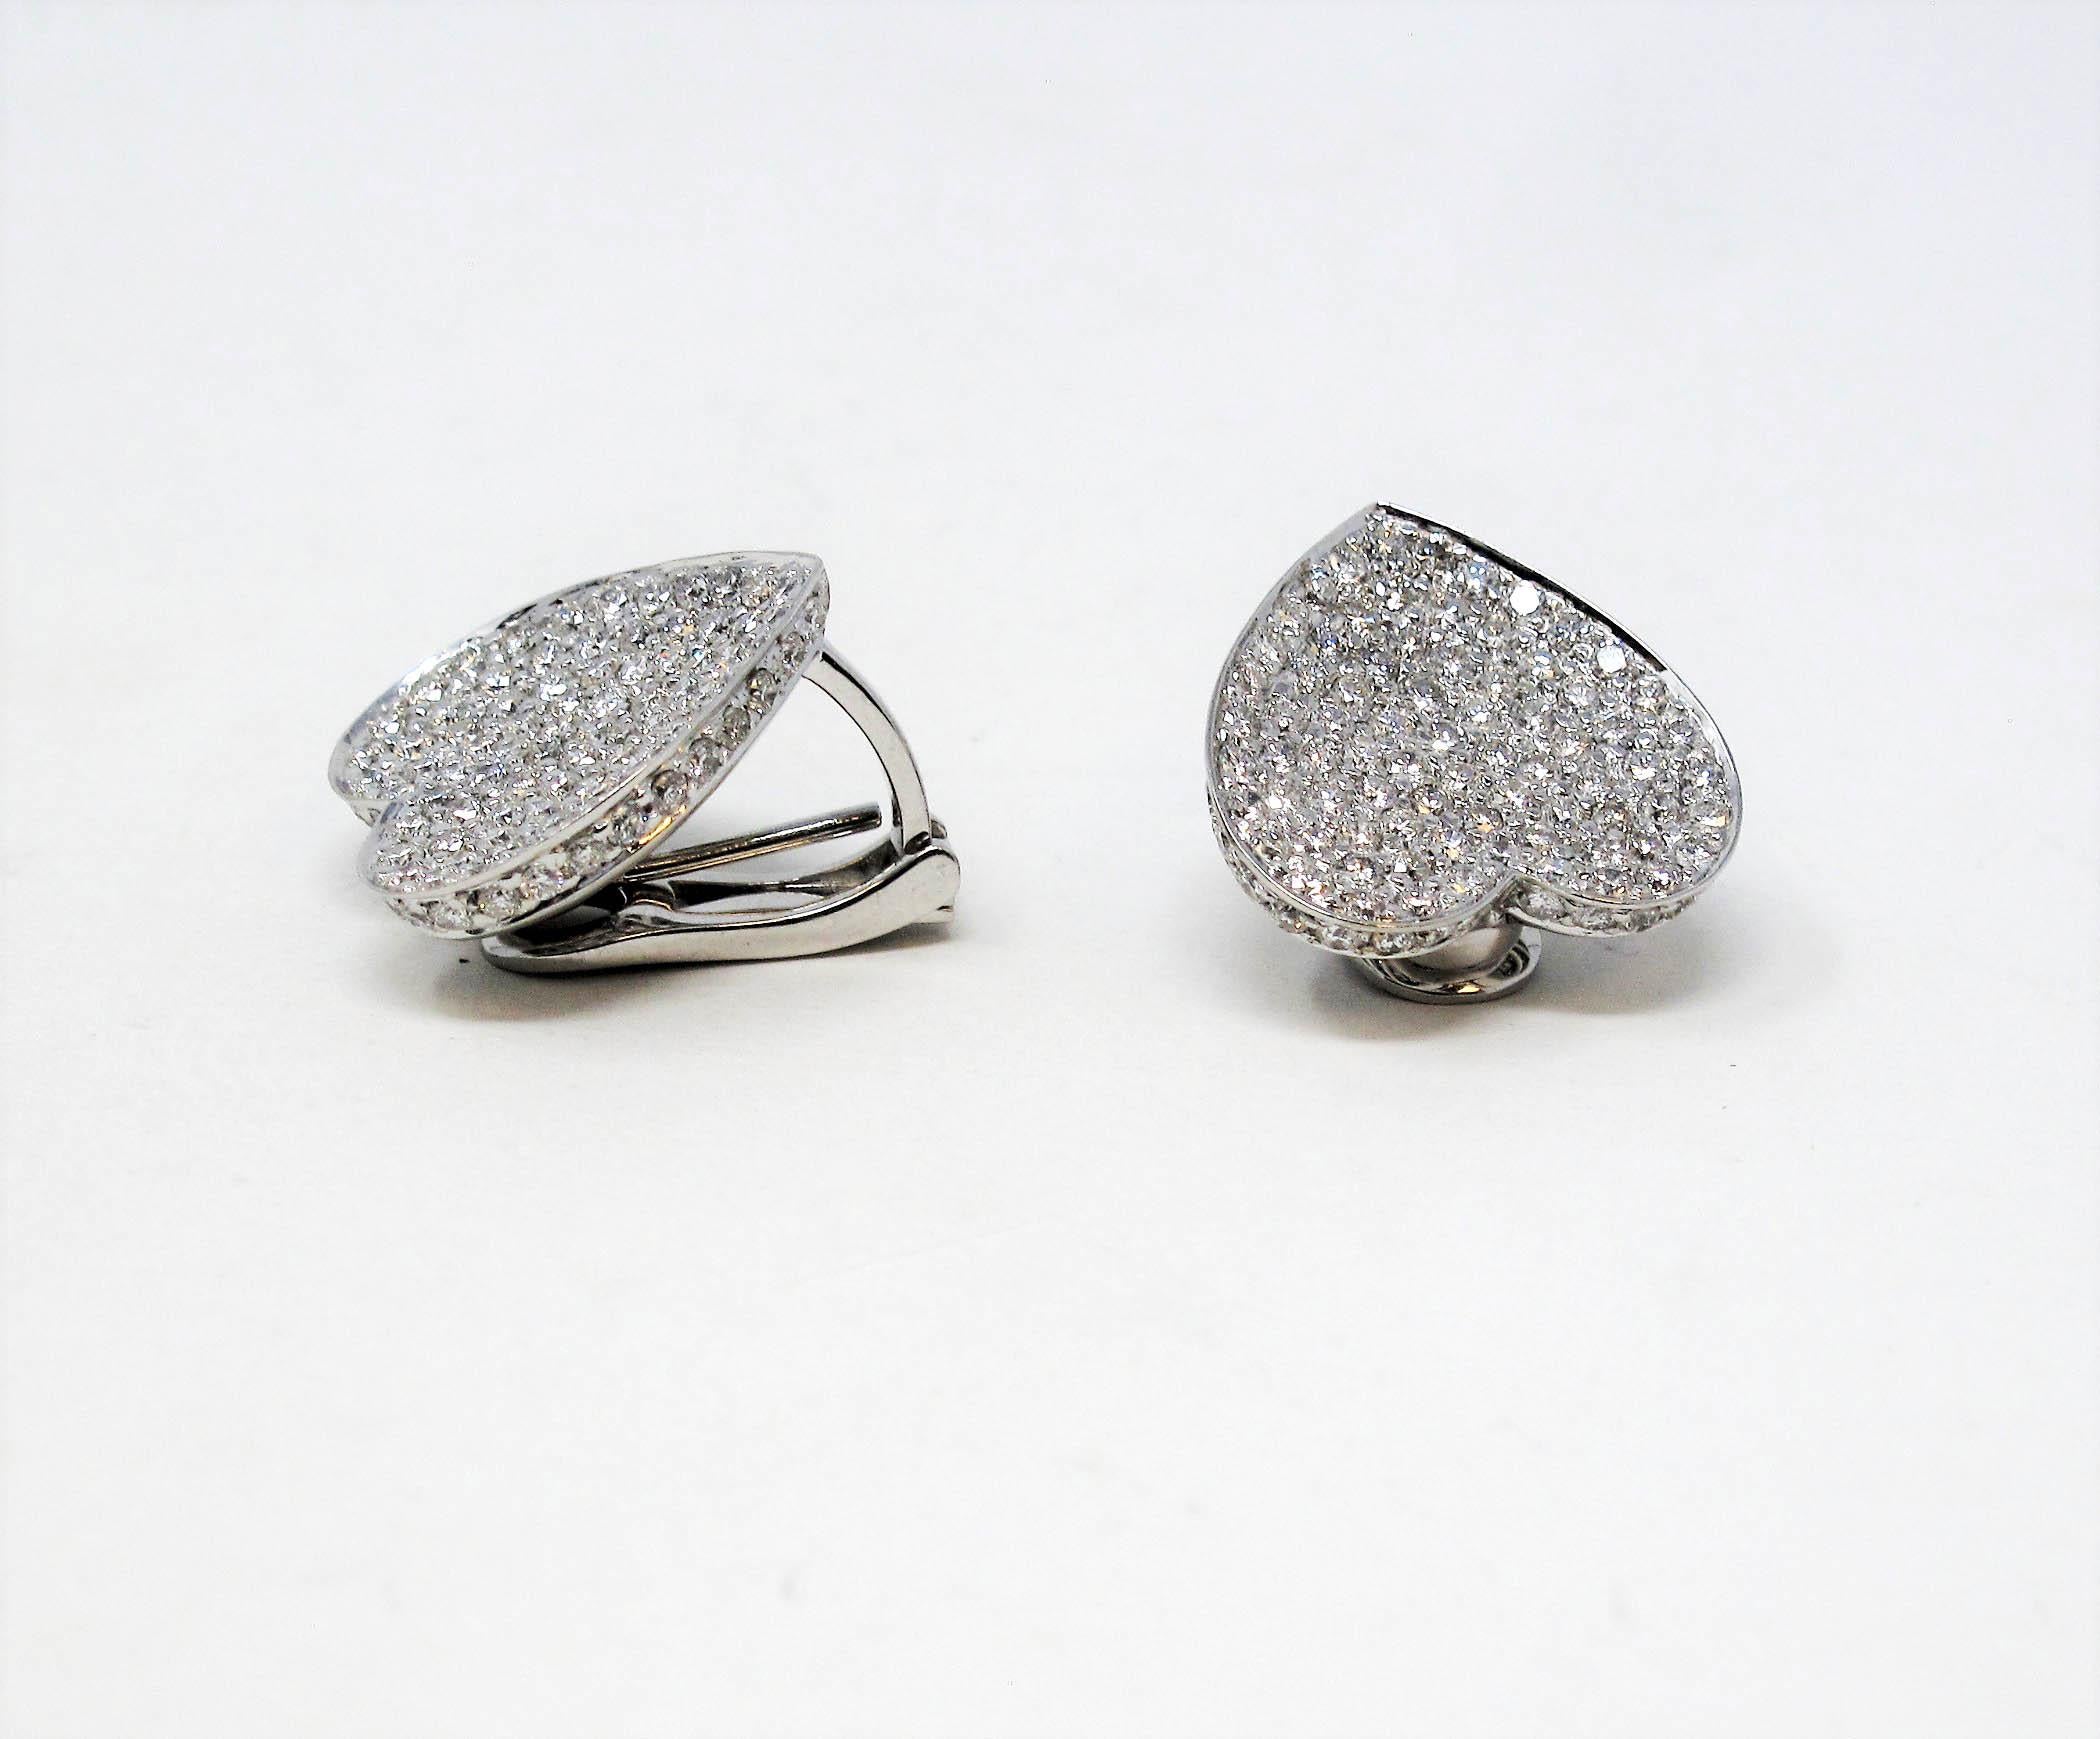 Extra Large Diamond Pave Concave Heart Shaped Earrings in 14 Karat White Gold In Excellent Condition For Sale In Scottsdale, AZ